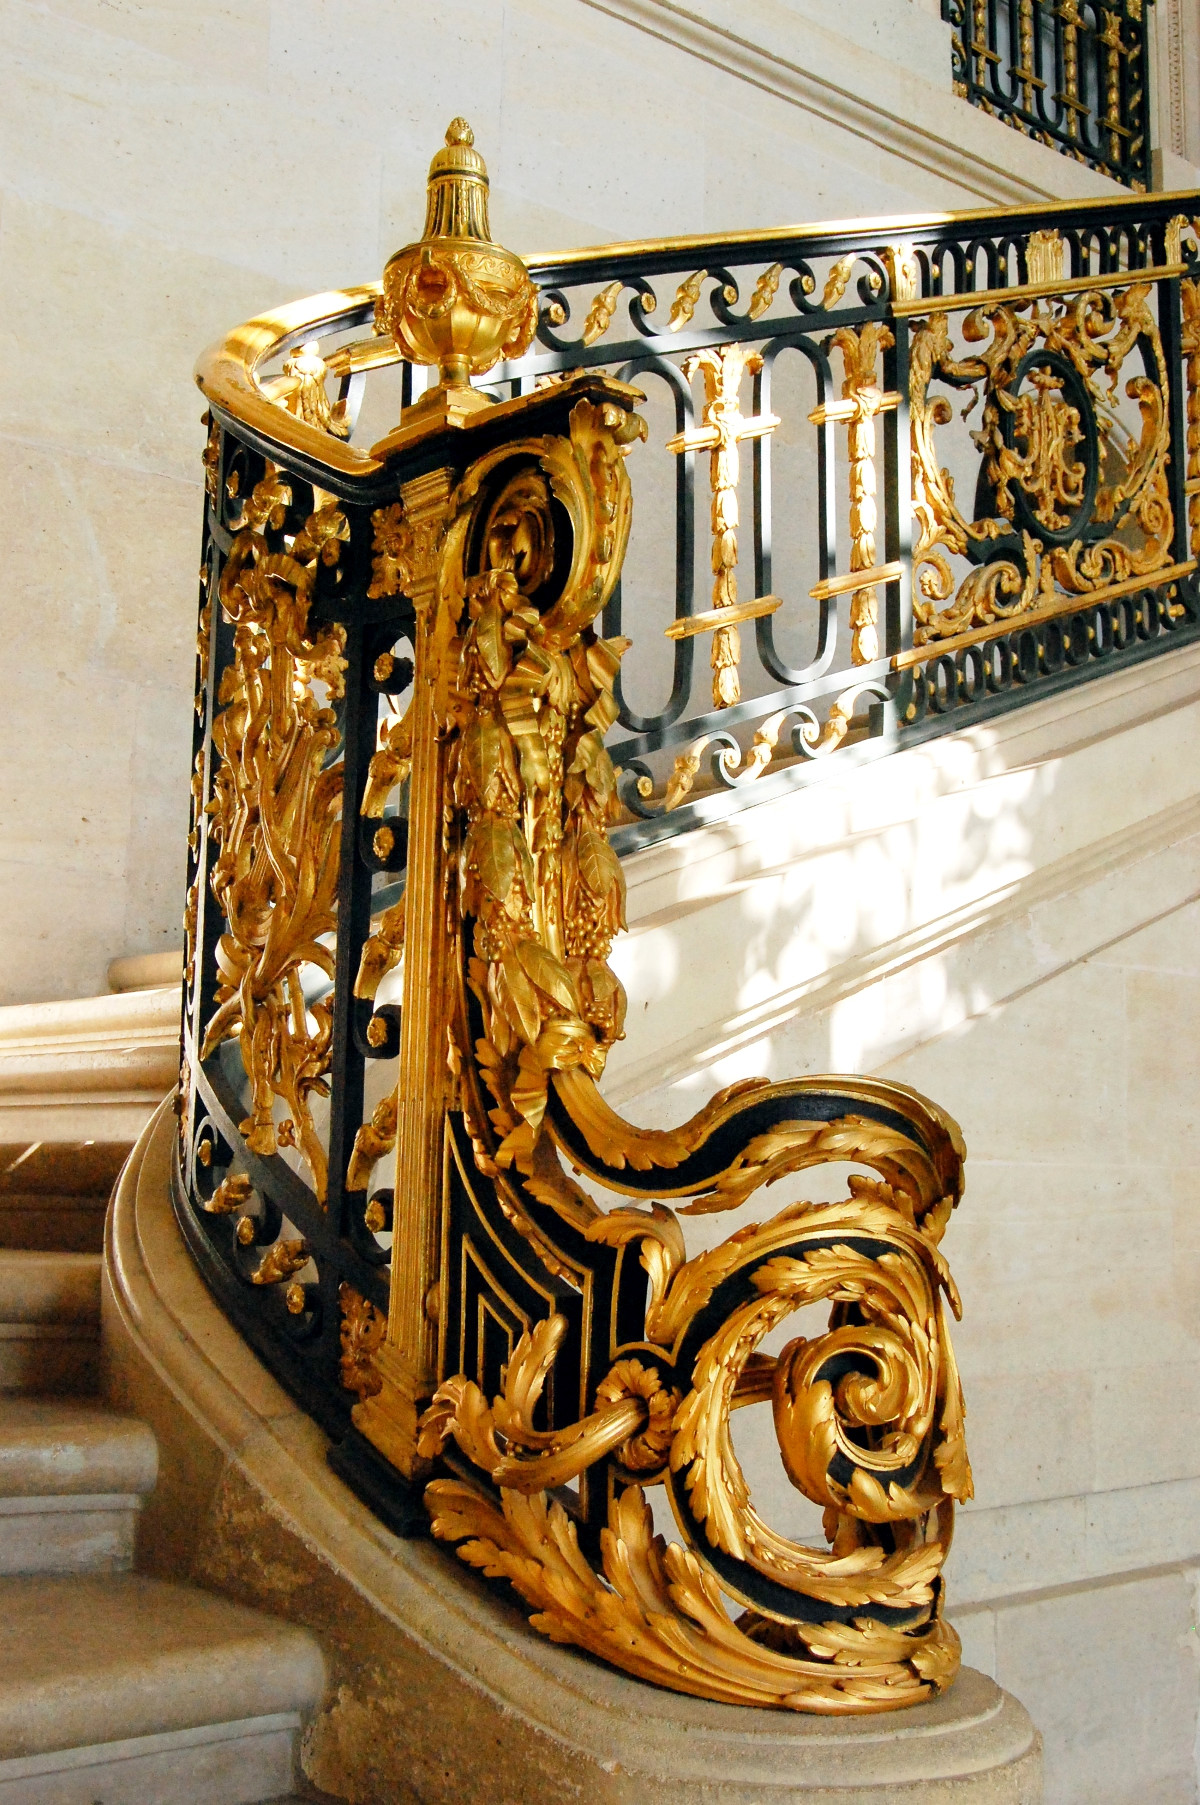 Stairway inside the Petit Trianon. Credit Trizek